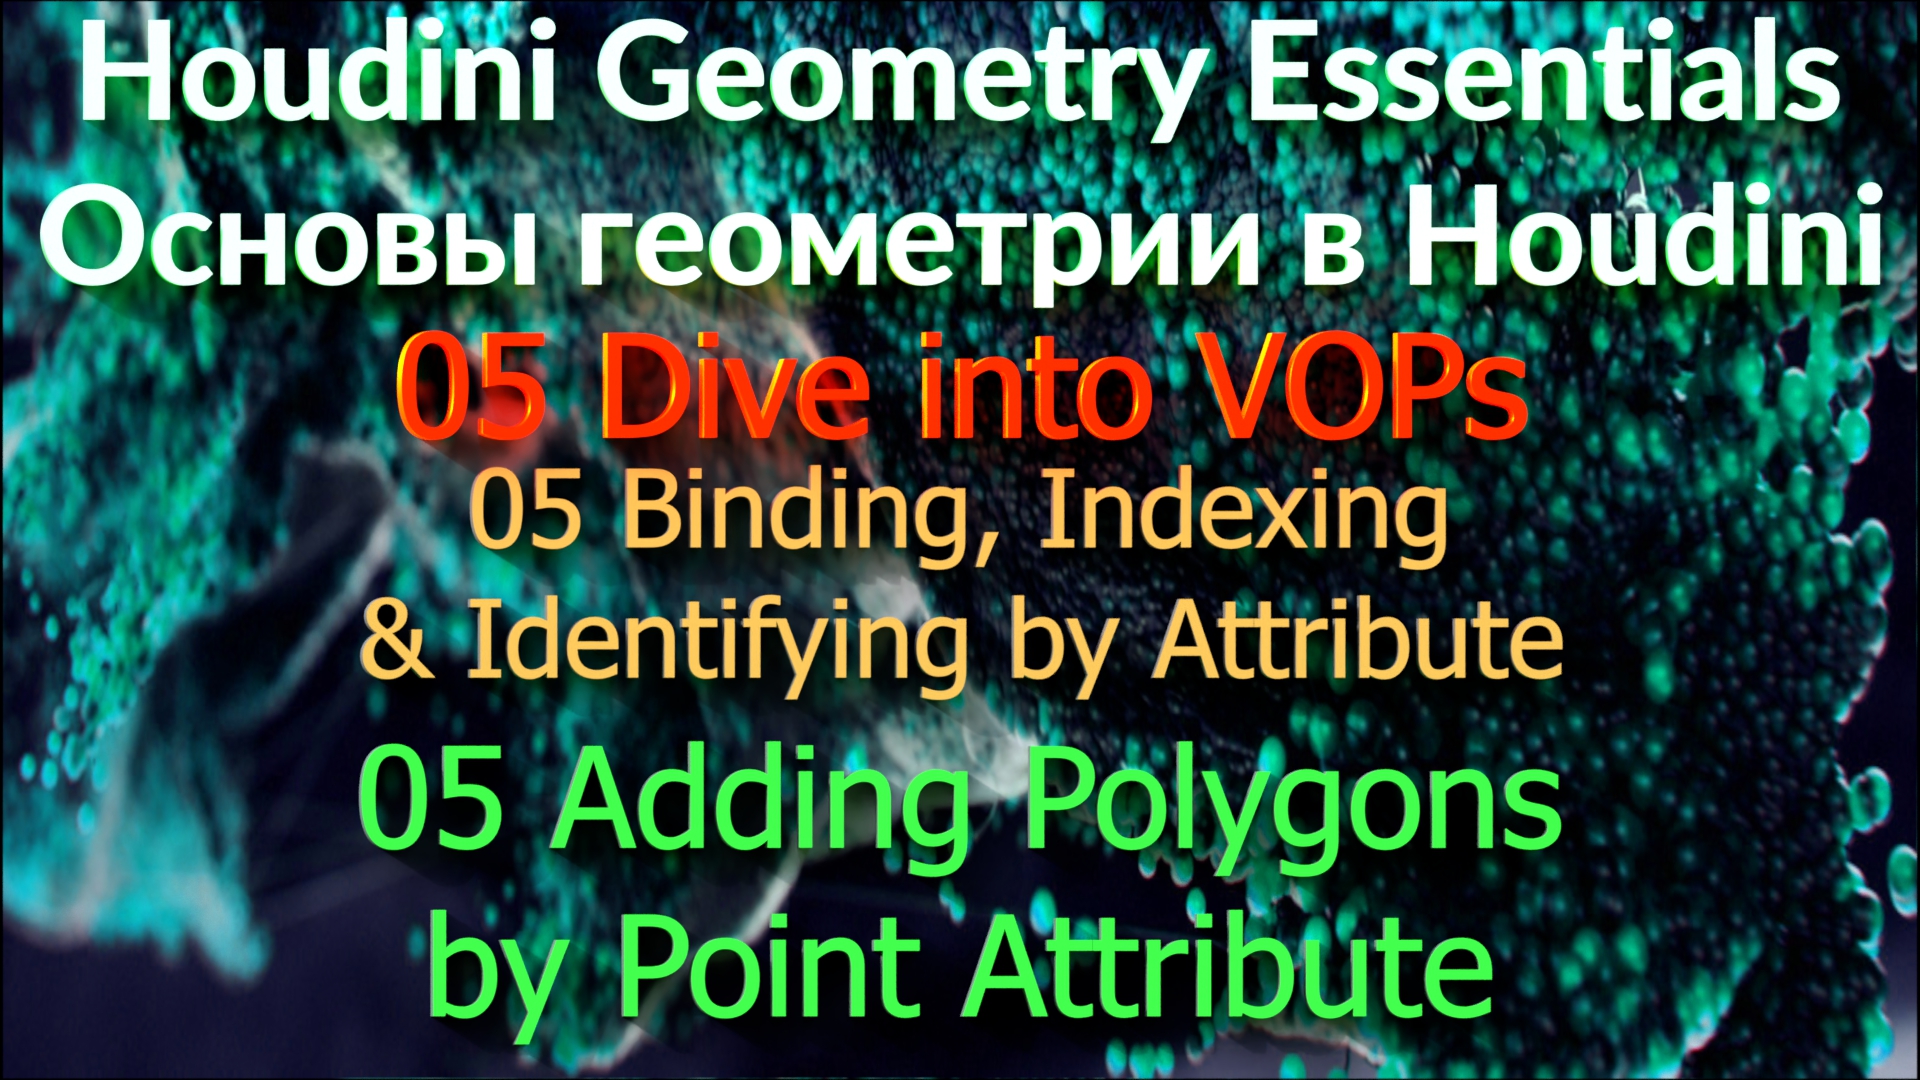 05_05_05 Adding Polygons by Point Attribute